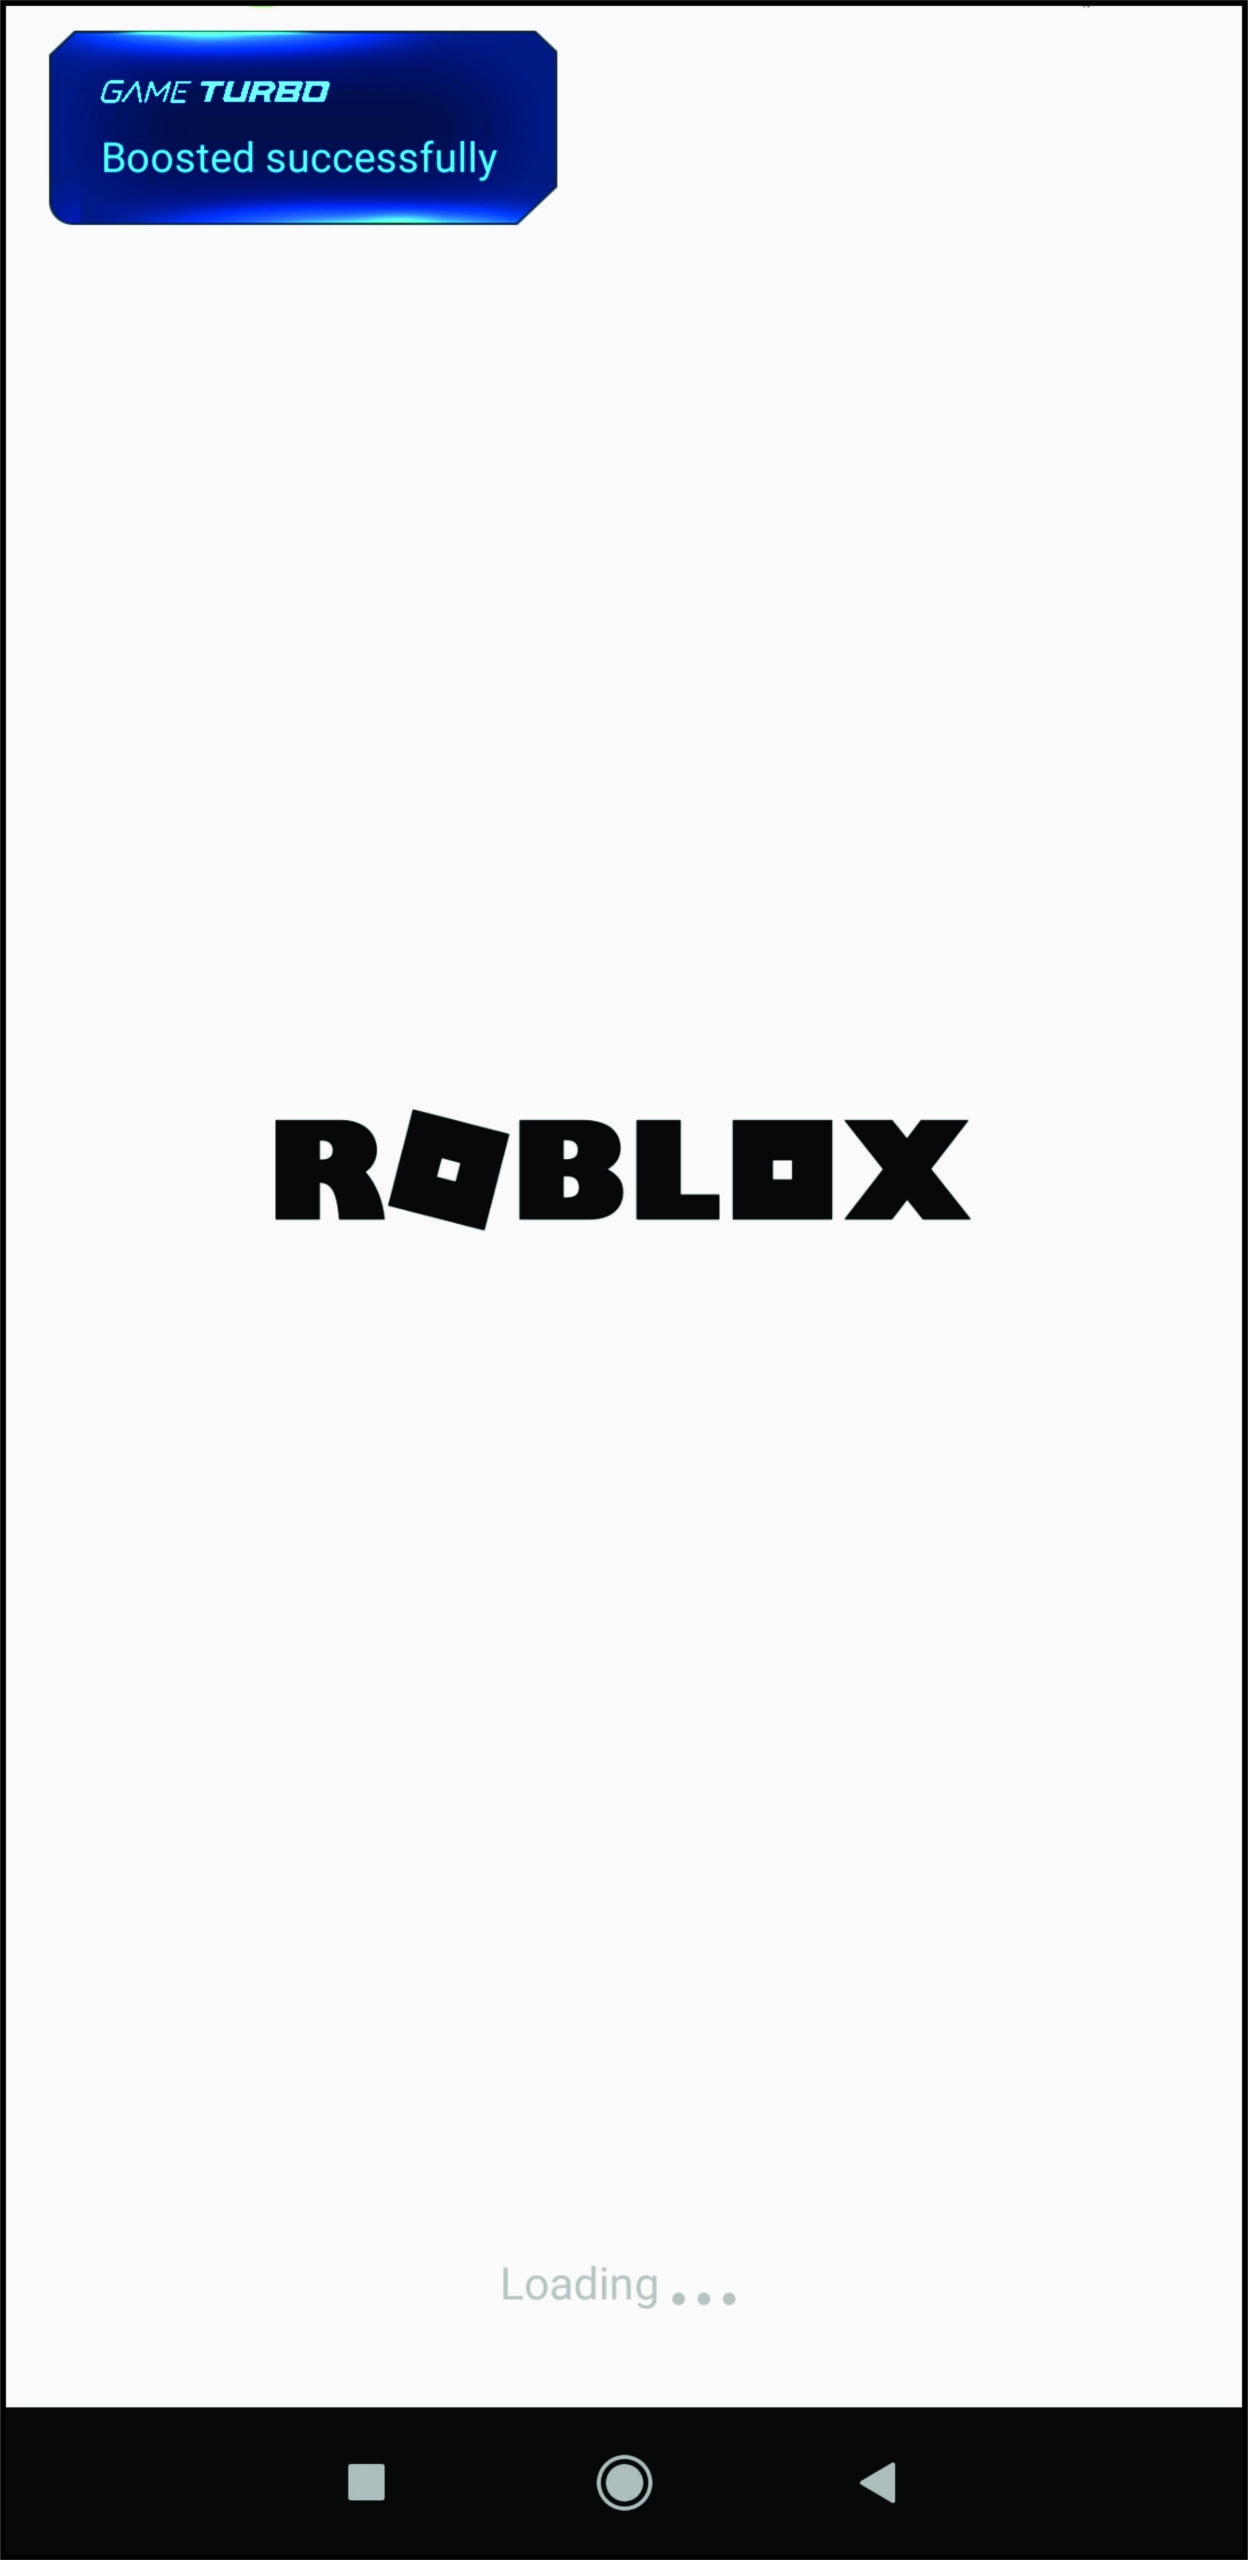 How to View Your FPS on Roblox